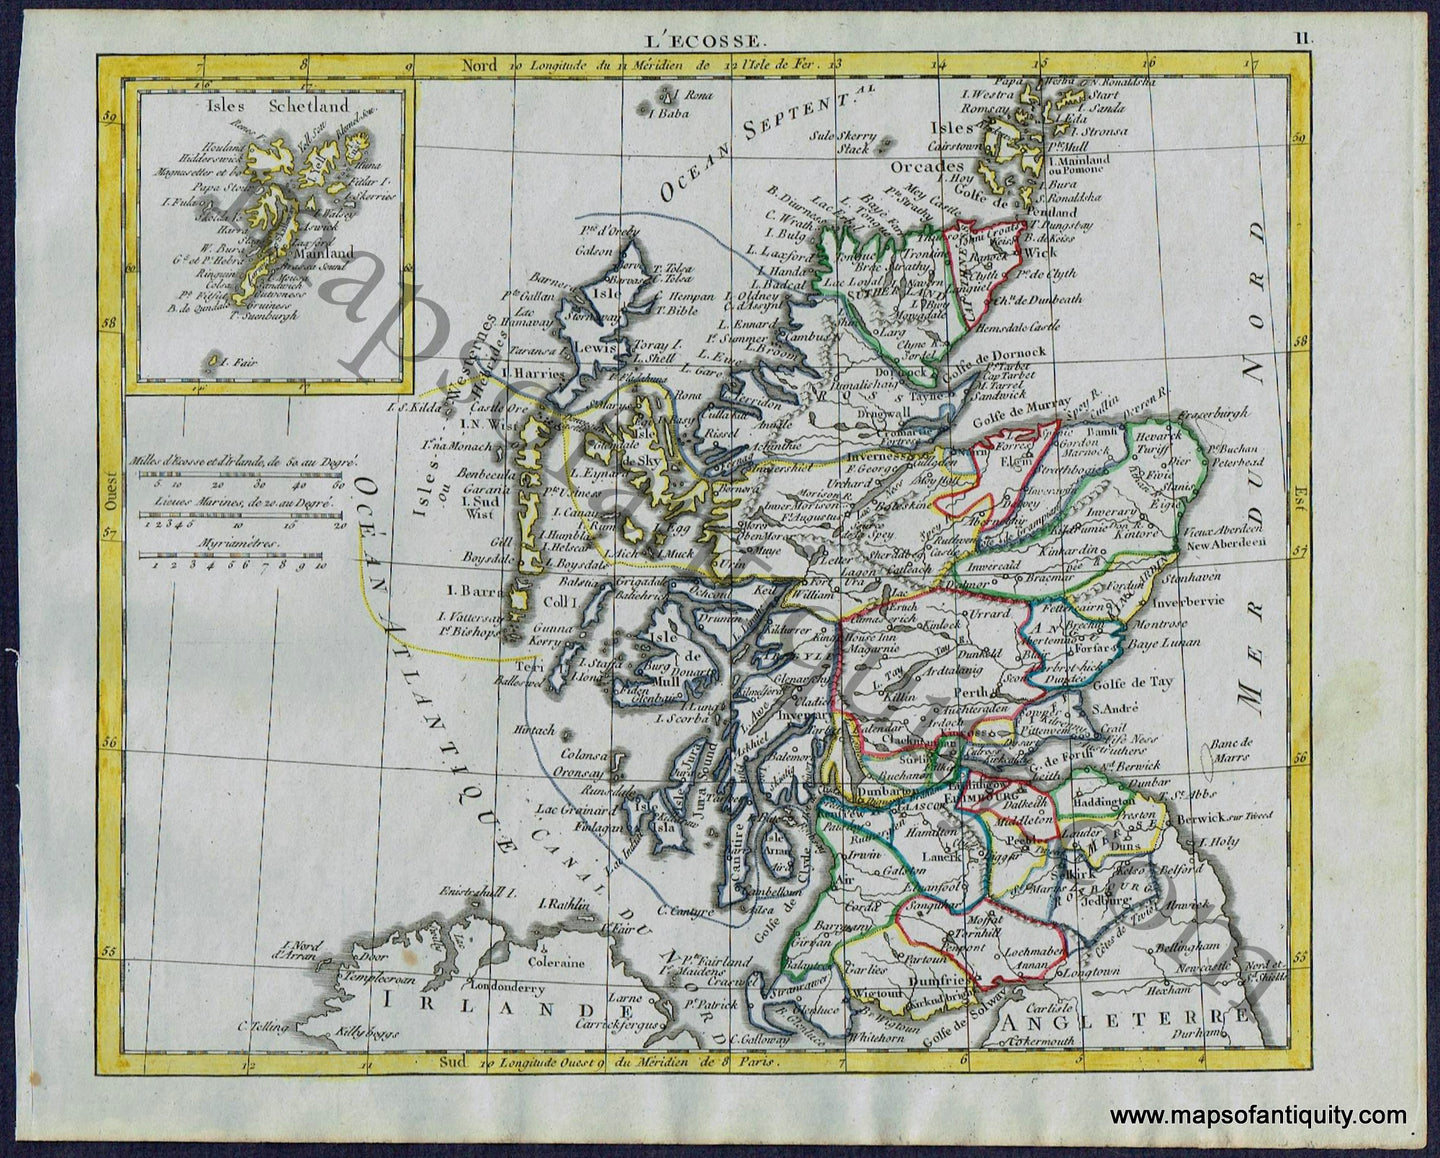 Antique-Map-Scotland-L'Ecosse-Herrison-French-1806-1800s-Early-19th-Century-Maps-of-Antiquity